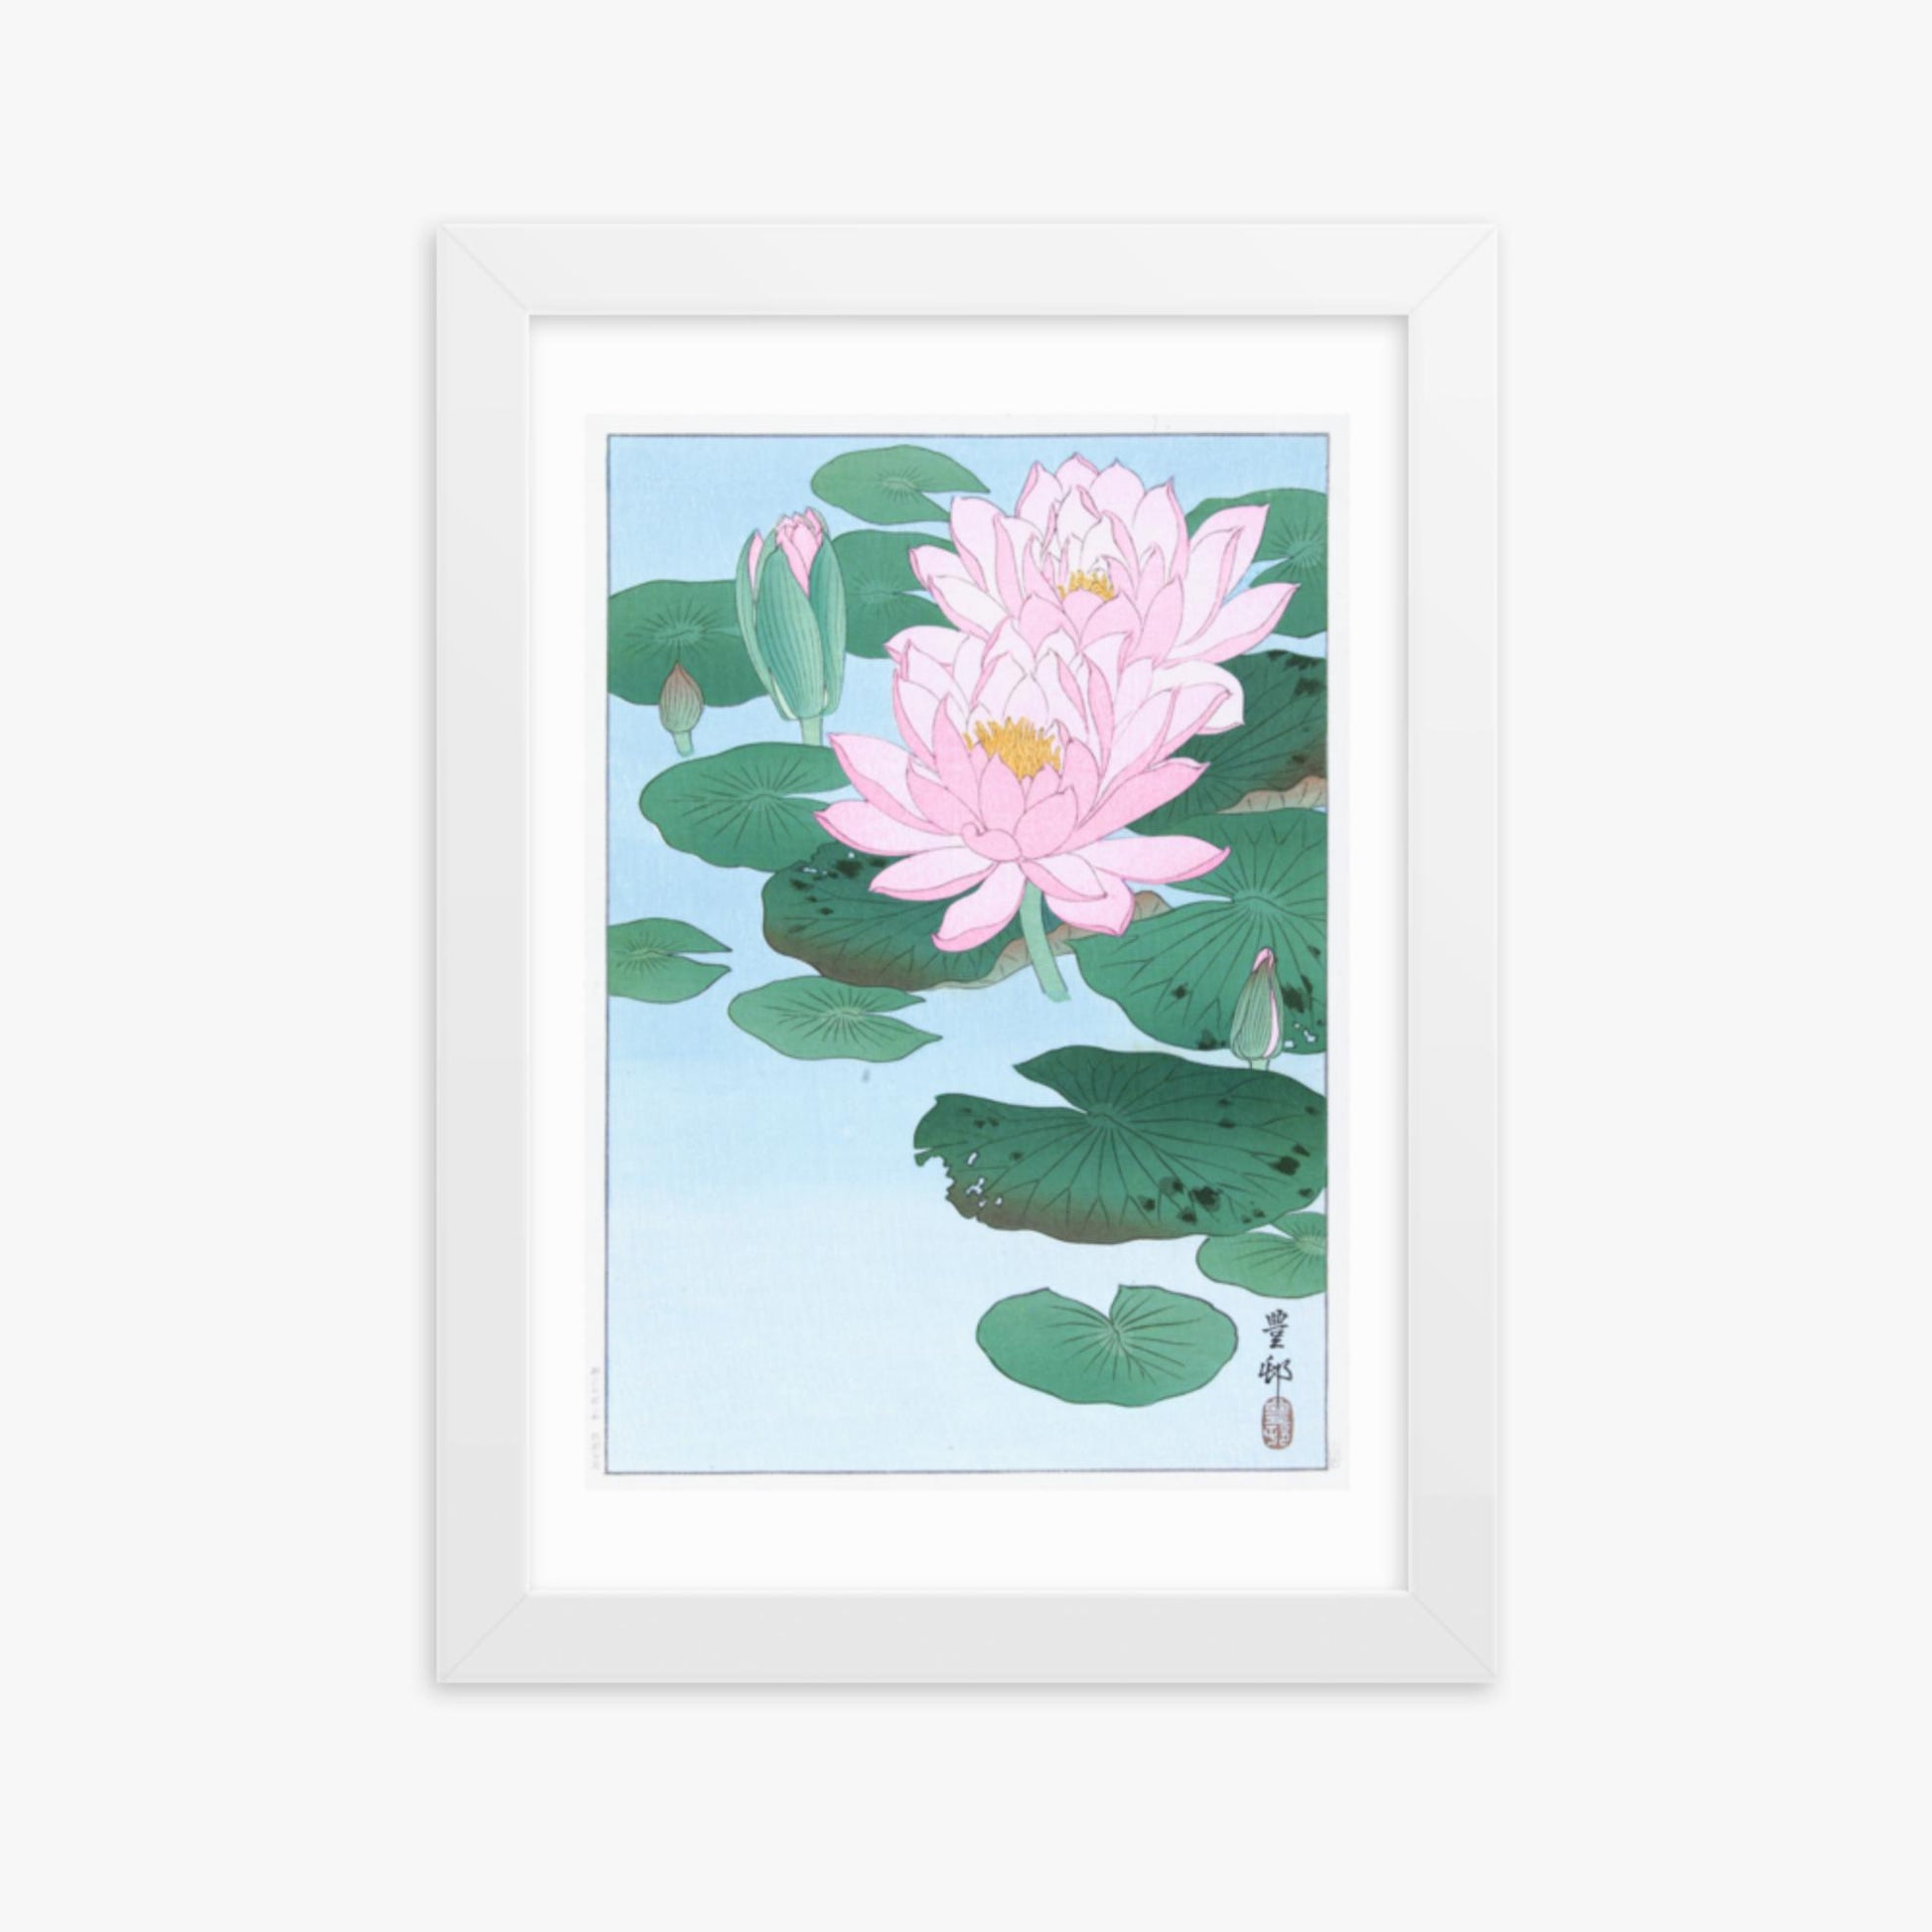 Ohara Koson - Water Lily 21x30 cm Poster With White Frame